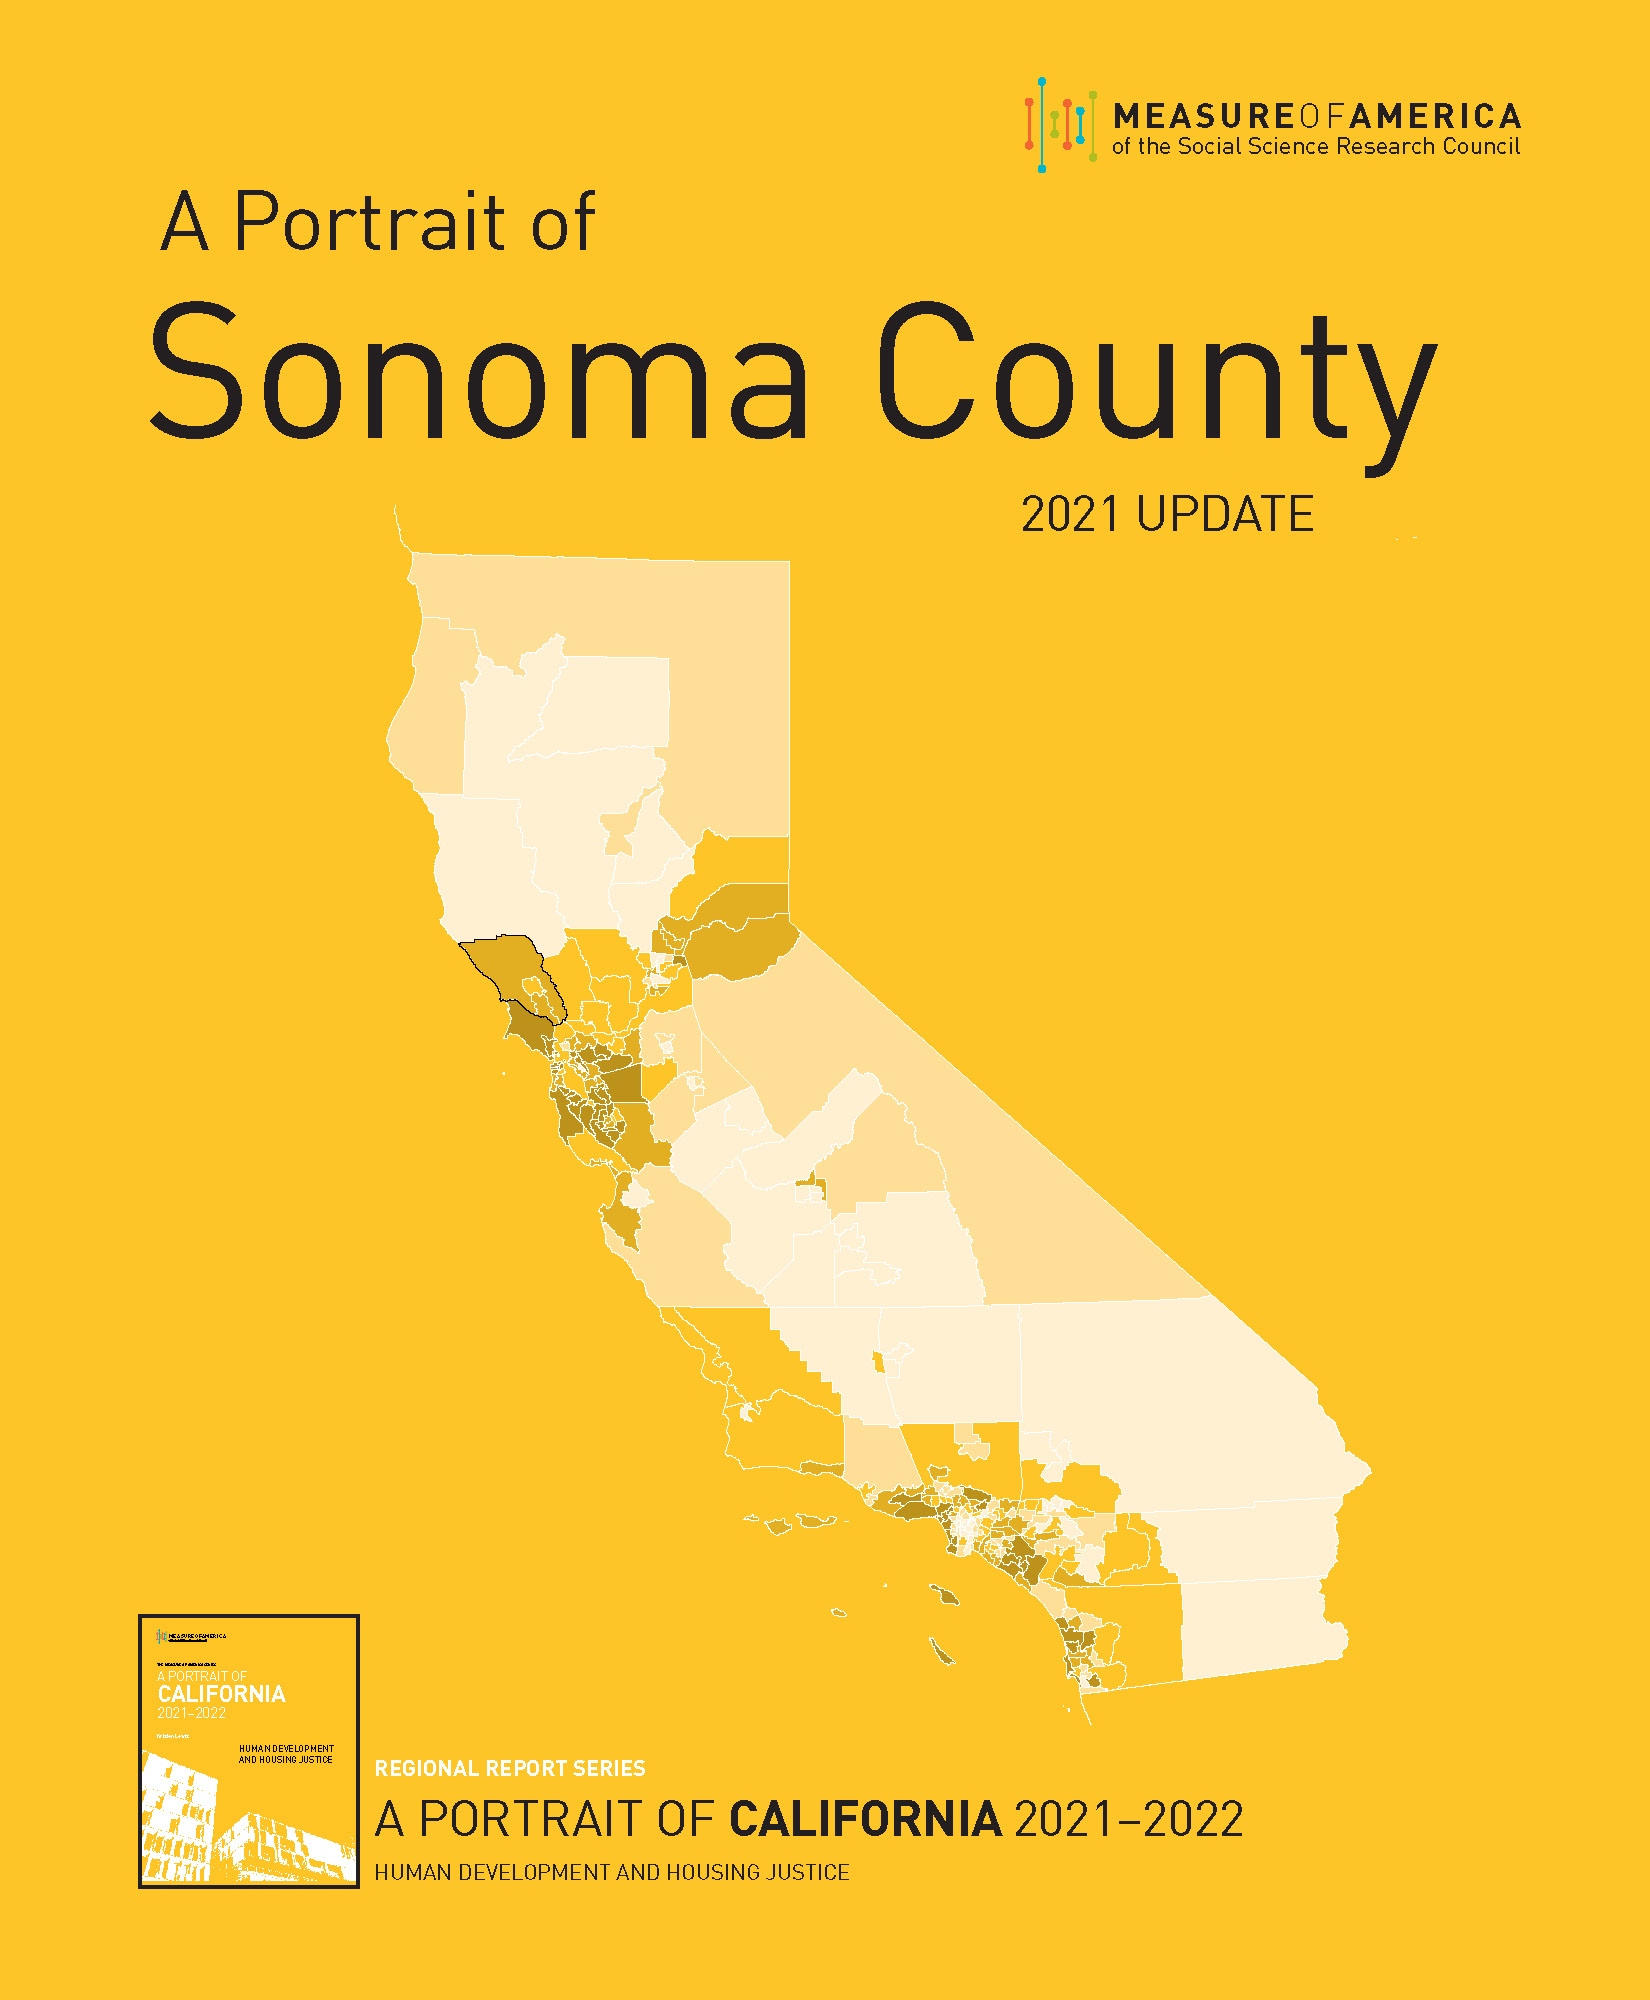 Read the 2021 Report Lea el Informe de 2021 Help the Agenda for Action Join the mailing list Learn more about the 2021 Portrait of Sonoma County Check out the groundbreaking 2014 Portrait of Sonoma County